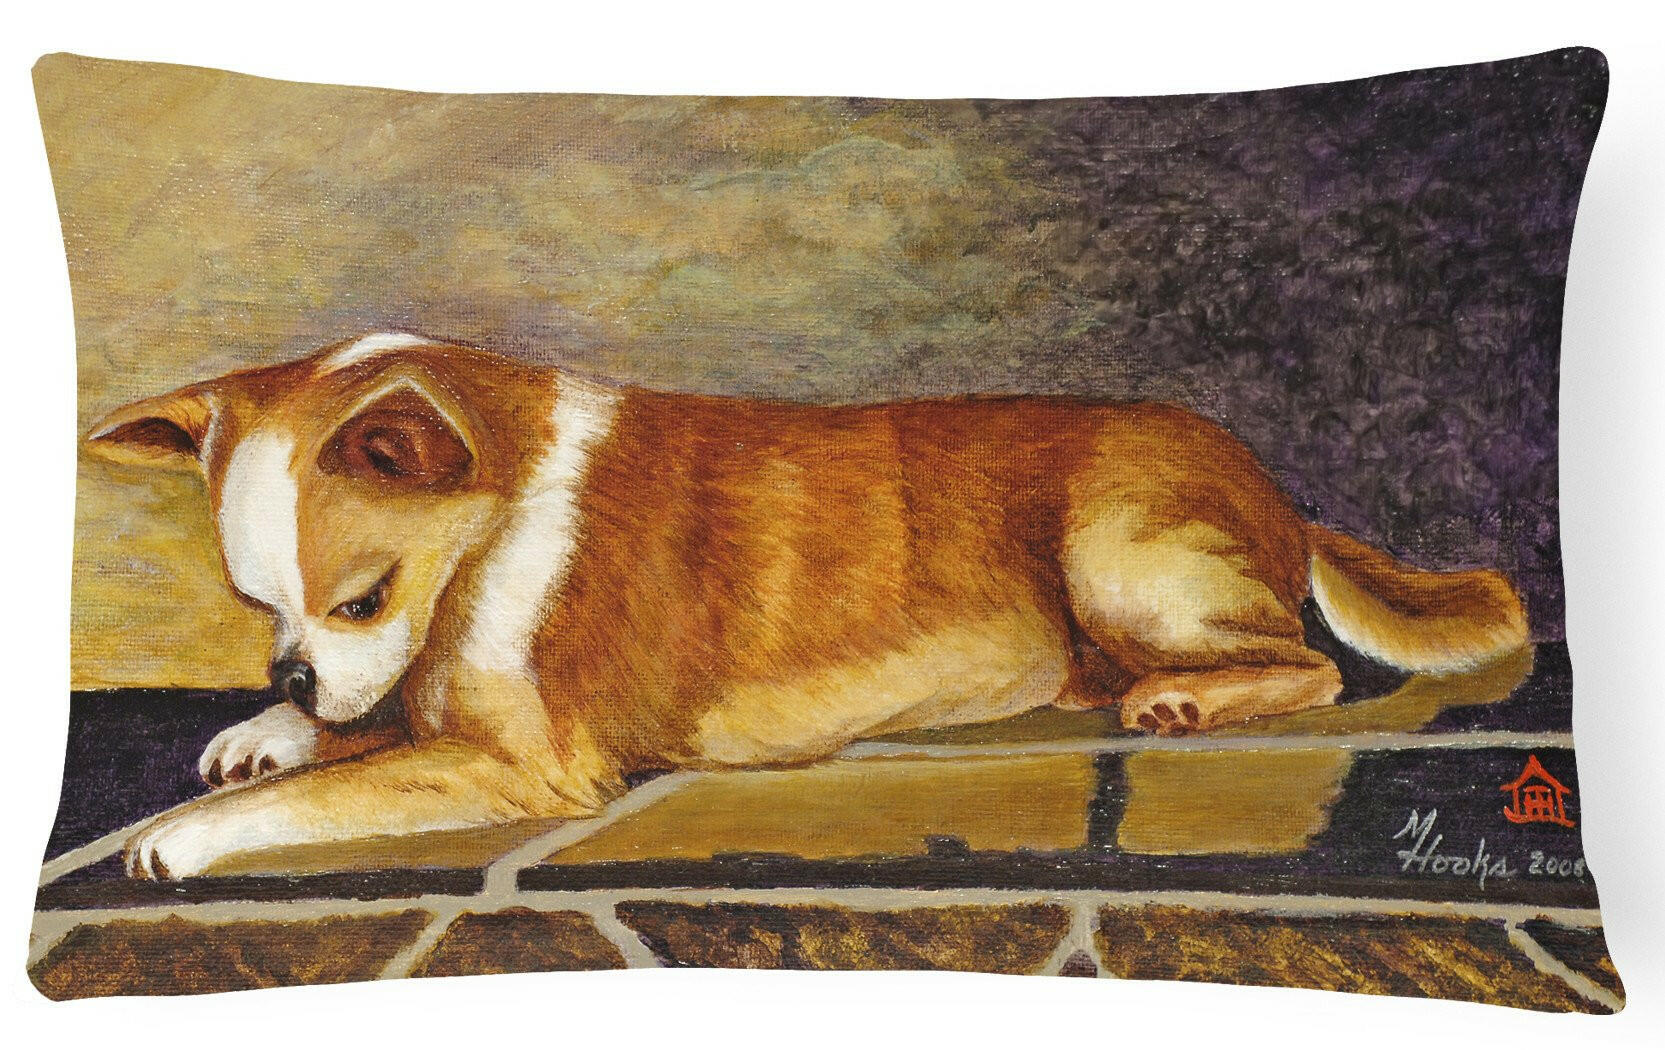 Chihuahua I See Me Fabric Decorative Pillow MH1052PW1216 by Caroline's Treasures